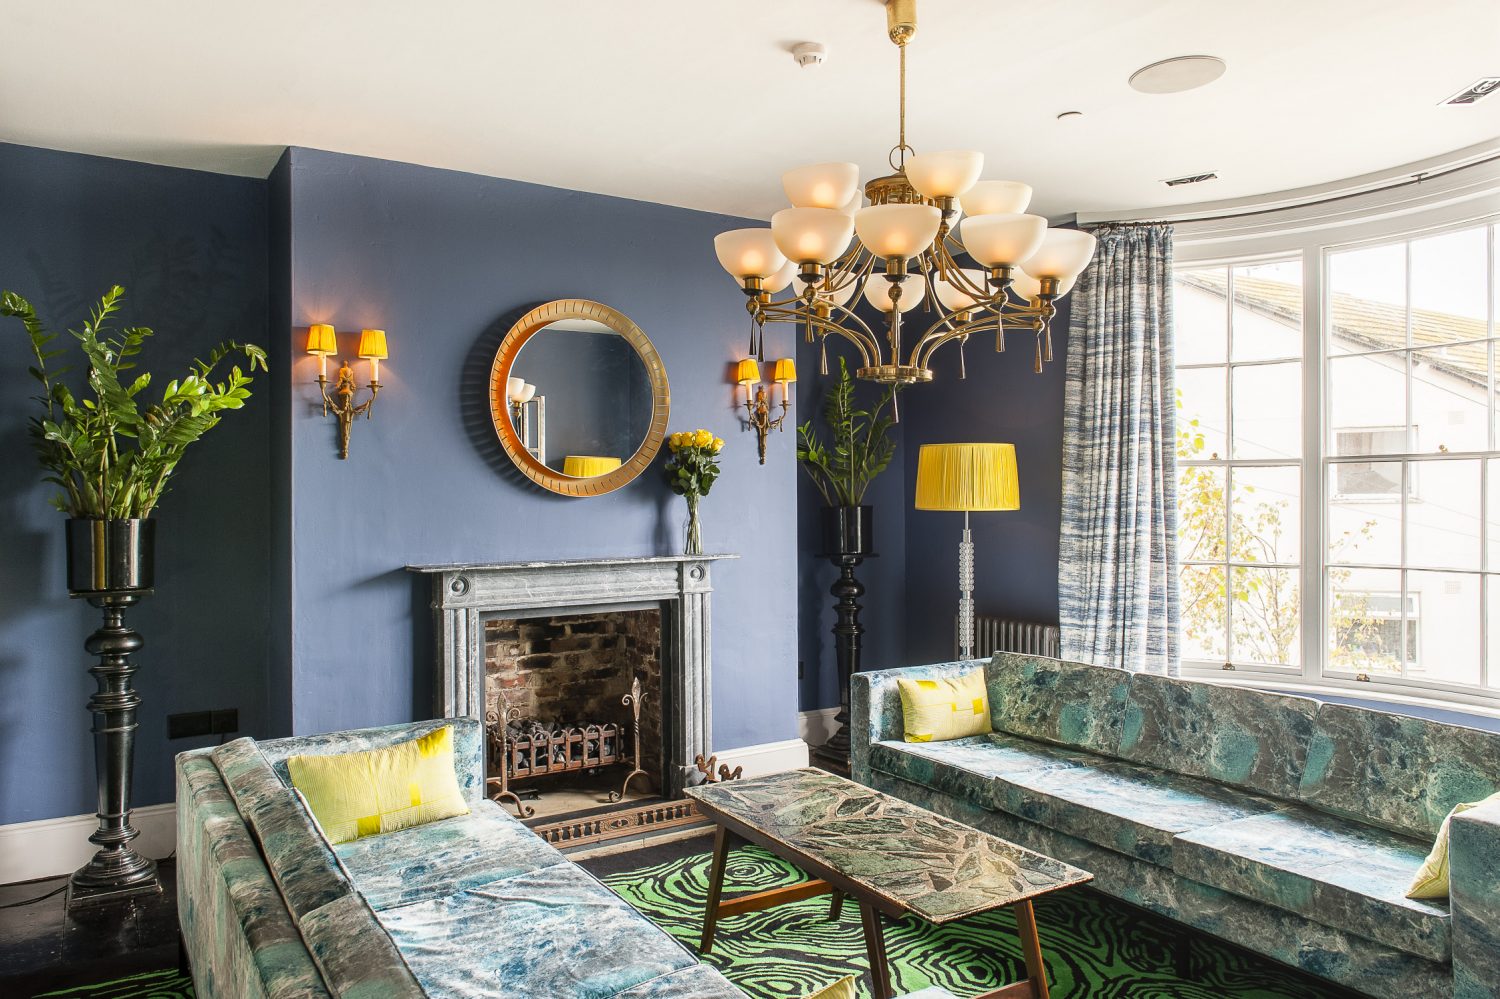 Two custom made marble-print velvet sofas sit below a 1940s brass chandelier in the sitting room